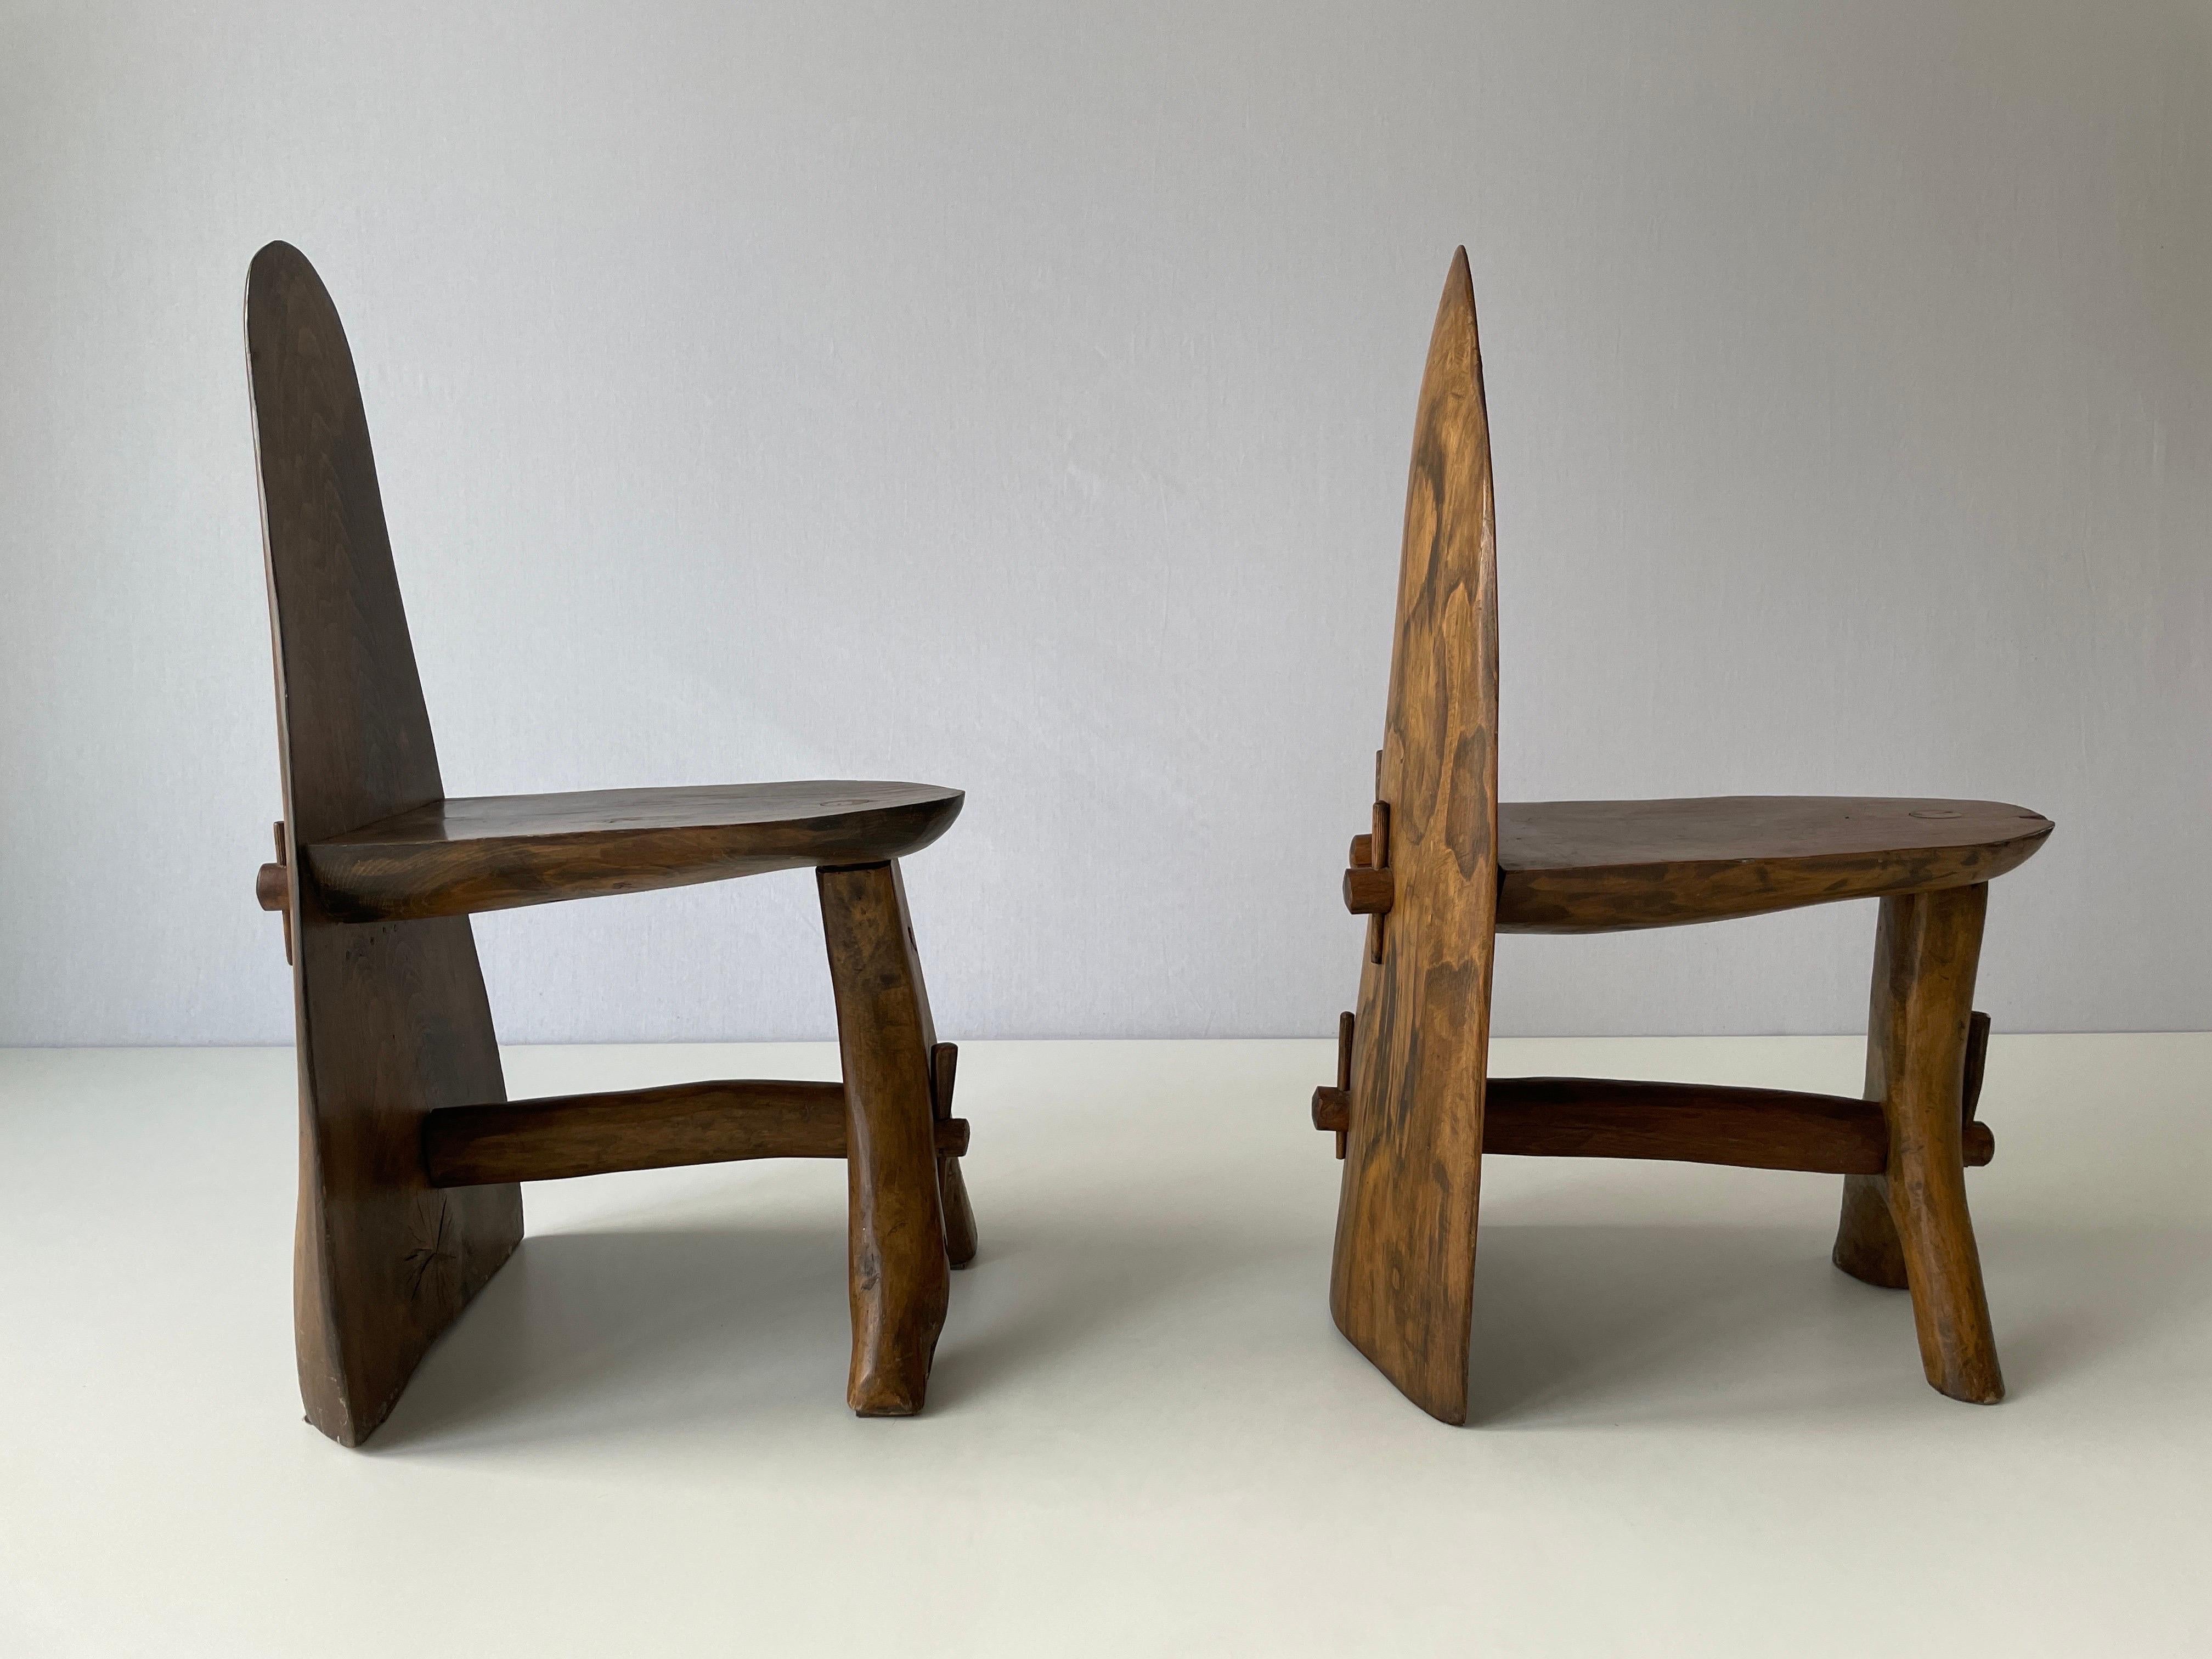 Mid-20th Century Hand-crafted Primitive Design Solid Wood Pair of Chairs, 1950s, Italy For Sale